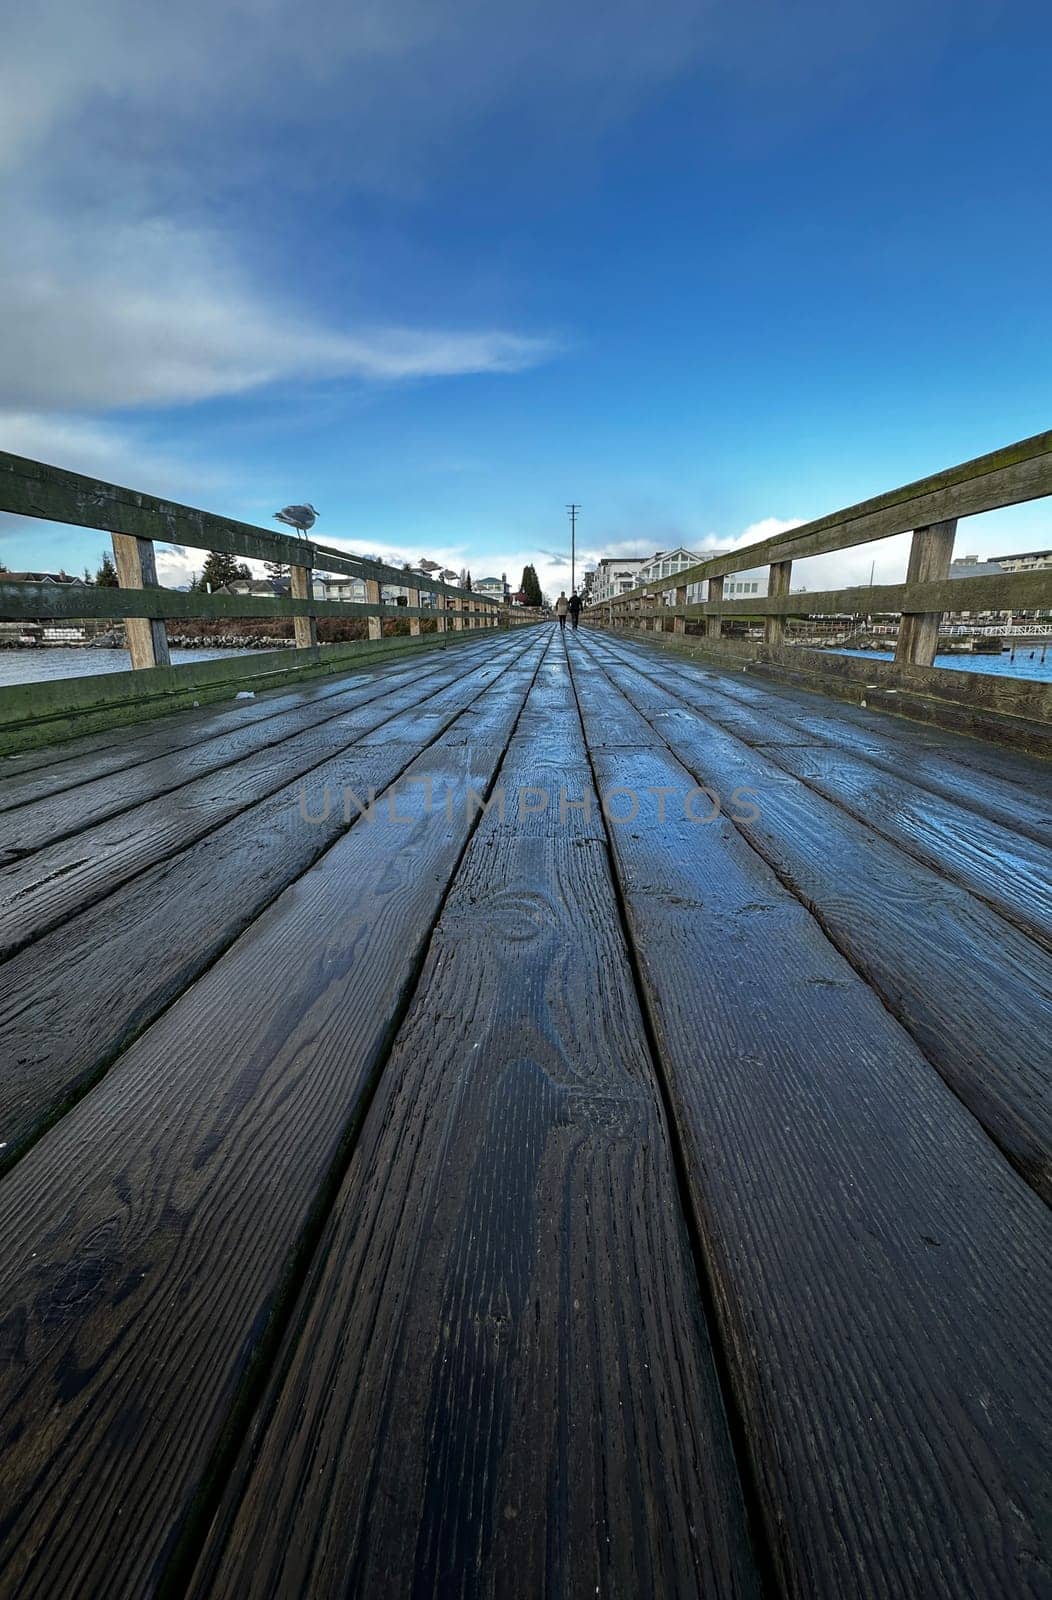 Wooden boardwalk or pier for walking along the shoreline of Sidney, British Columbia, Canada